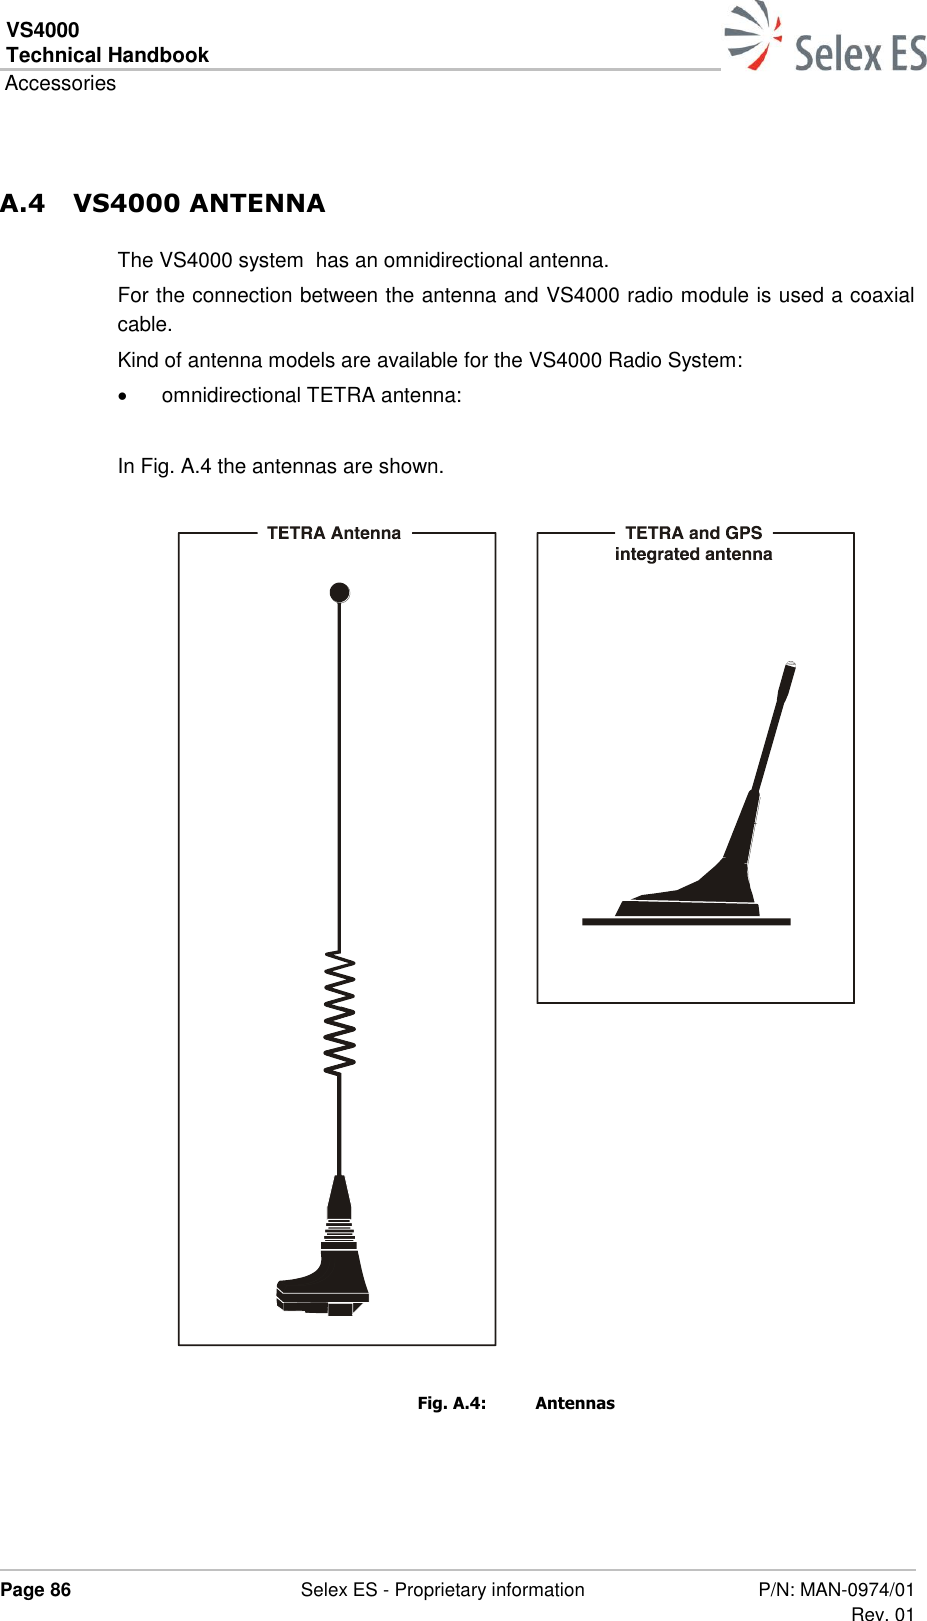 VS4000 Technical Handbook  Accessories  Page 86  Selex ES - Proprietary information P/N: MAN-0974/01 Rev. 01  A.4 VS4000 ANTENNA The VS4000 system  has an omnidirectional antenna. For the connection between the antenna and VS4000 radio module is used a coaxial cable. Kind of antenna models are available for the VS4000 Radio System:   omnidirectional TETRA antenna:  In Fig. A.4 the antennas are shown.  Fig. A.4:  Antennas   